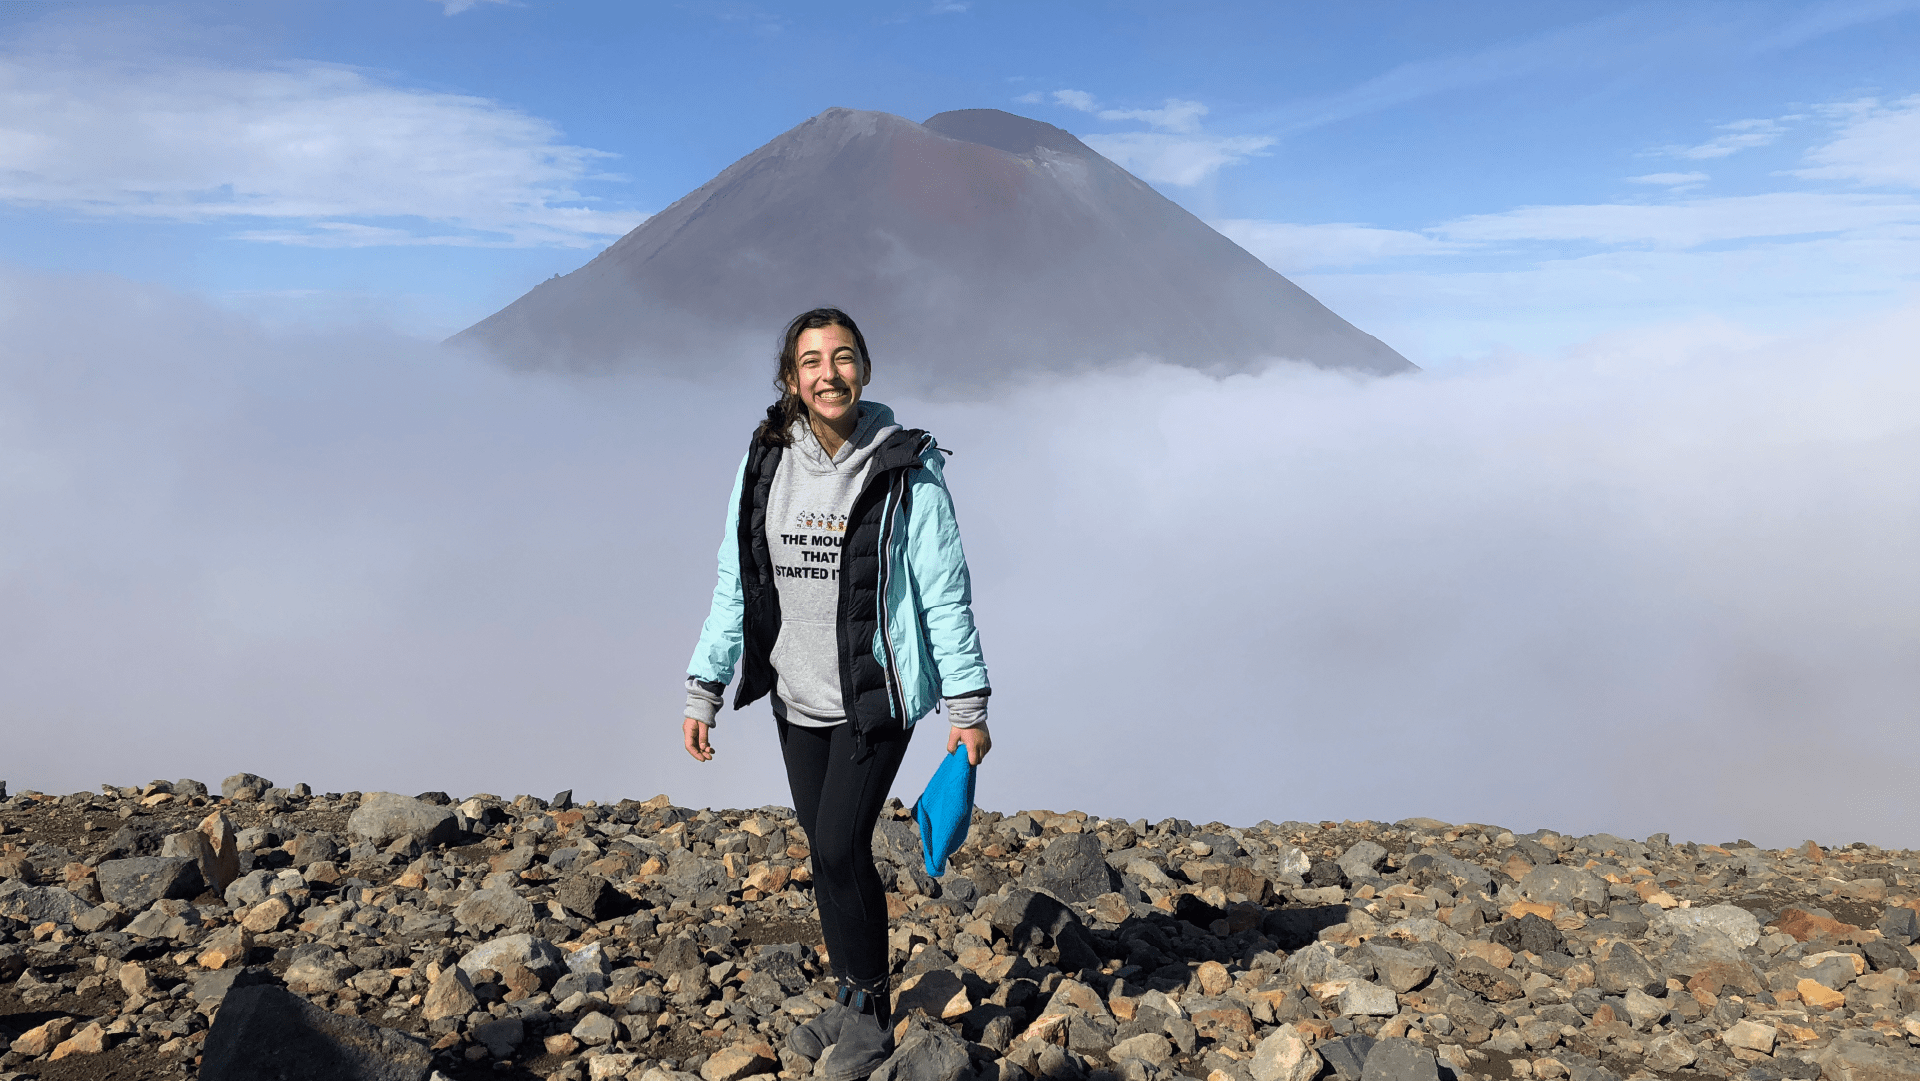 smiling girl in a light blue jacket and grey hoodie on top of a mountain with low clouds and scenic mountaintop view